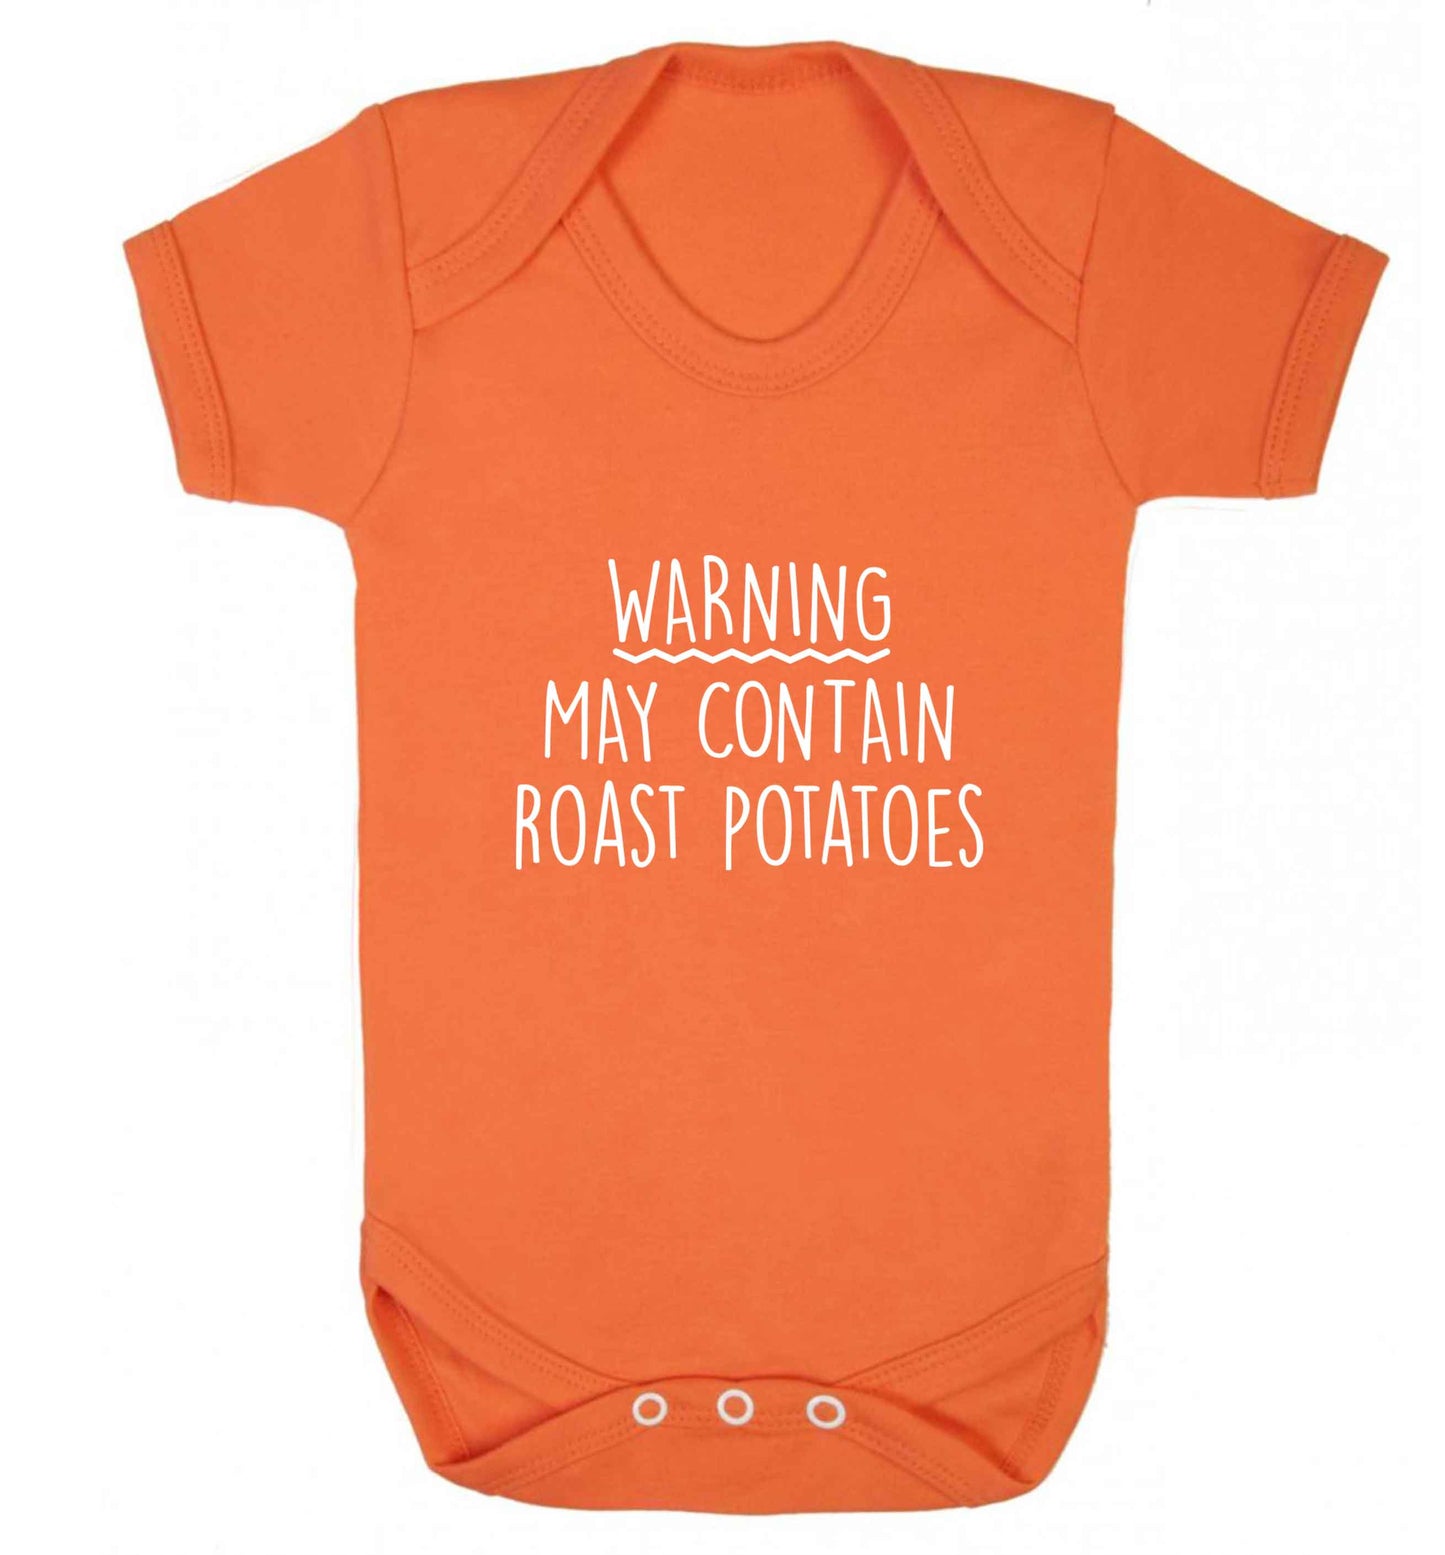 Warning may containg roast potatoes baby vest orange 18-24 months